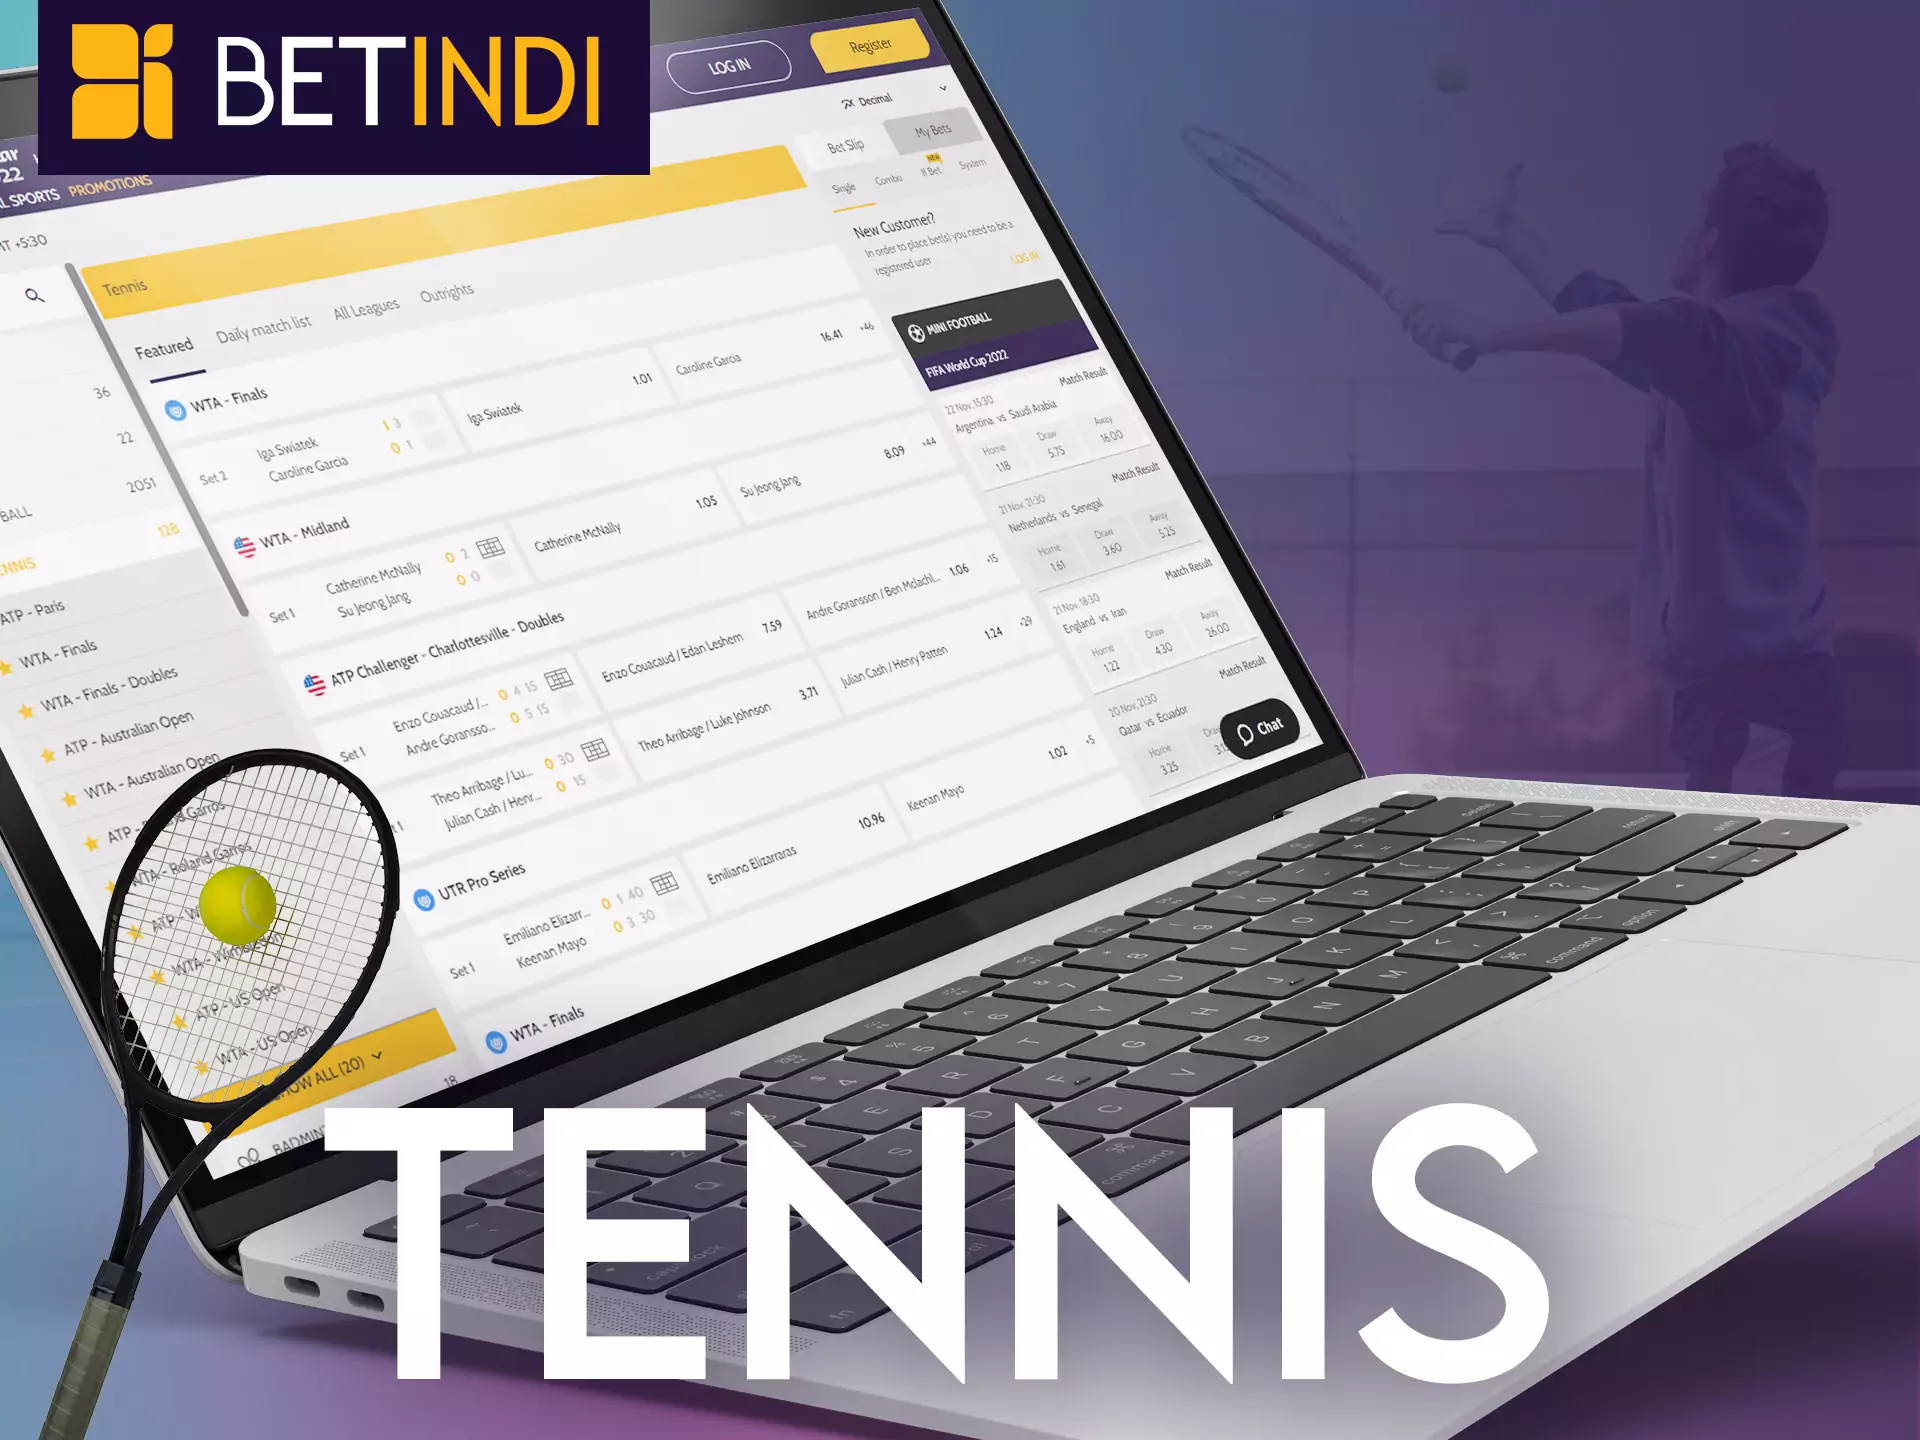 With Betindi you can bet on tennis.